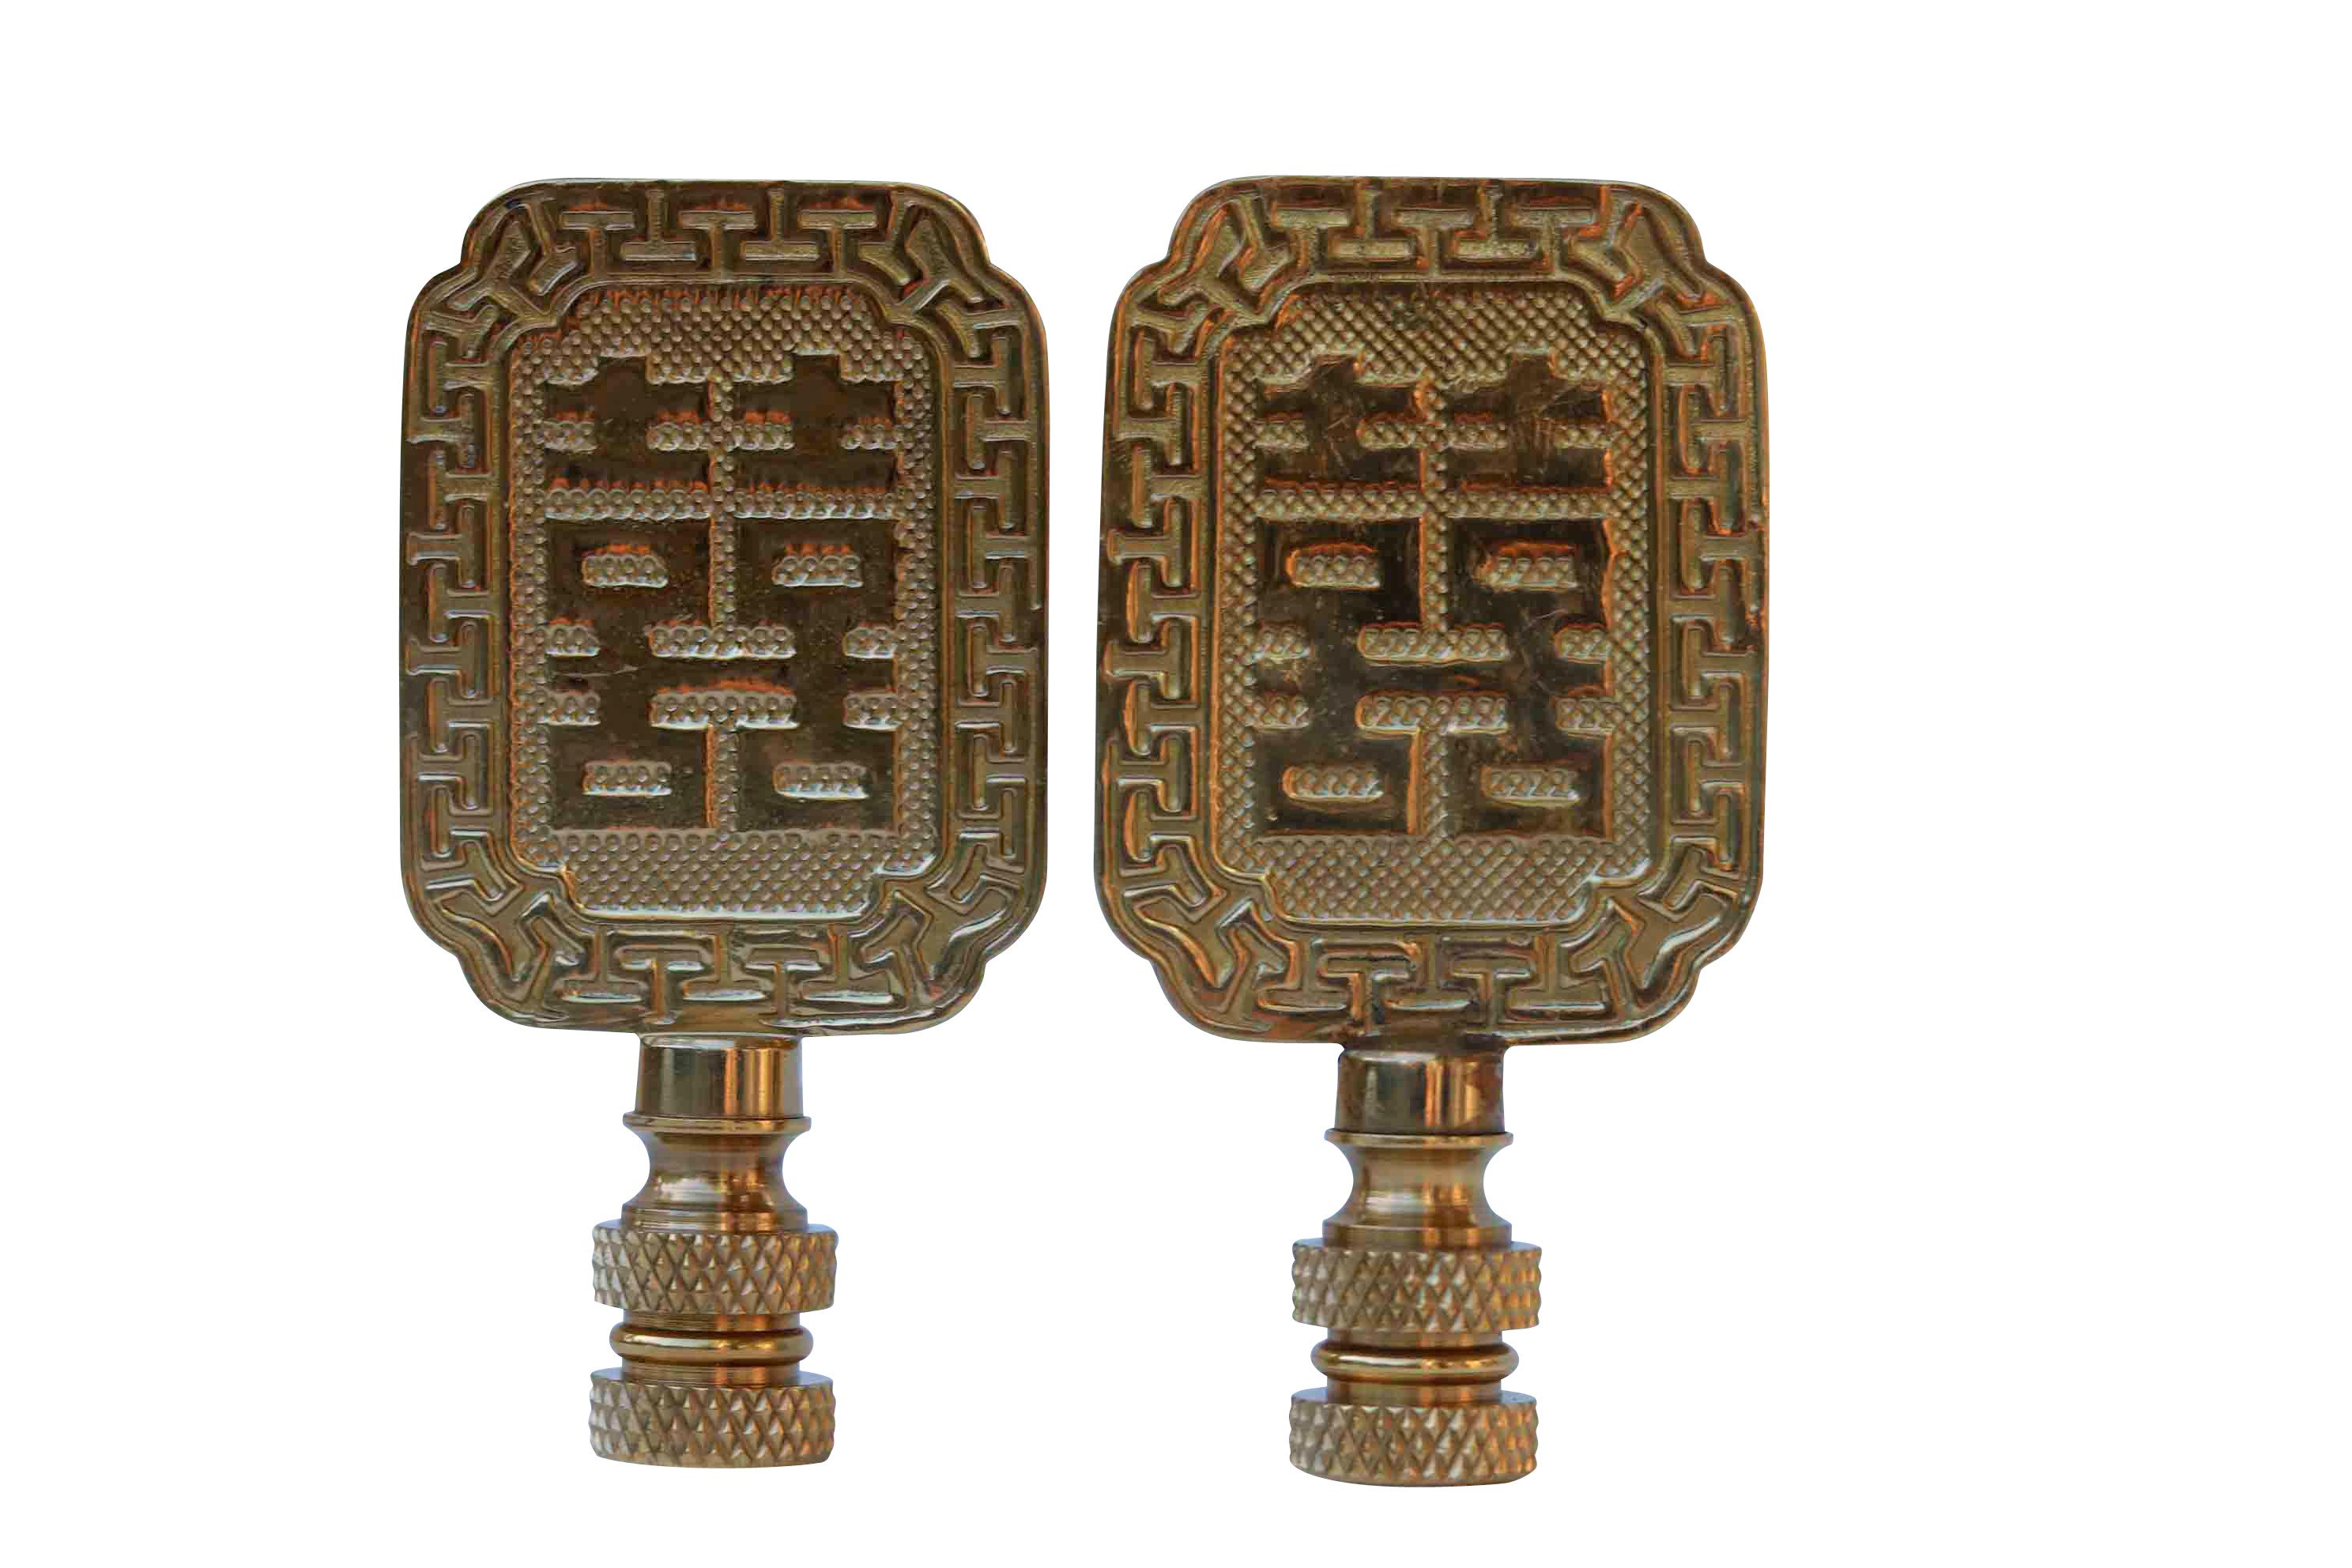 Double Happiness Lamp Finials - a Pair~P77614646